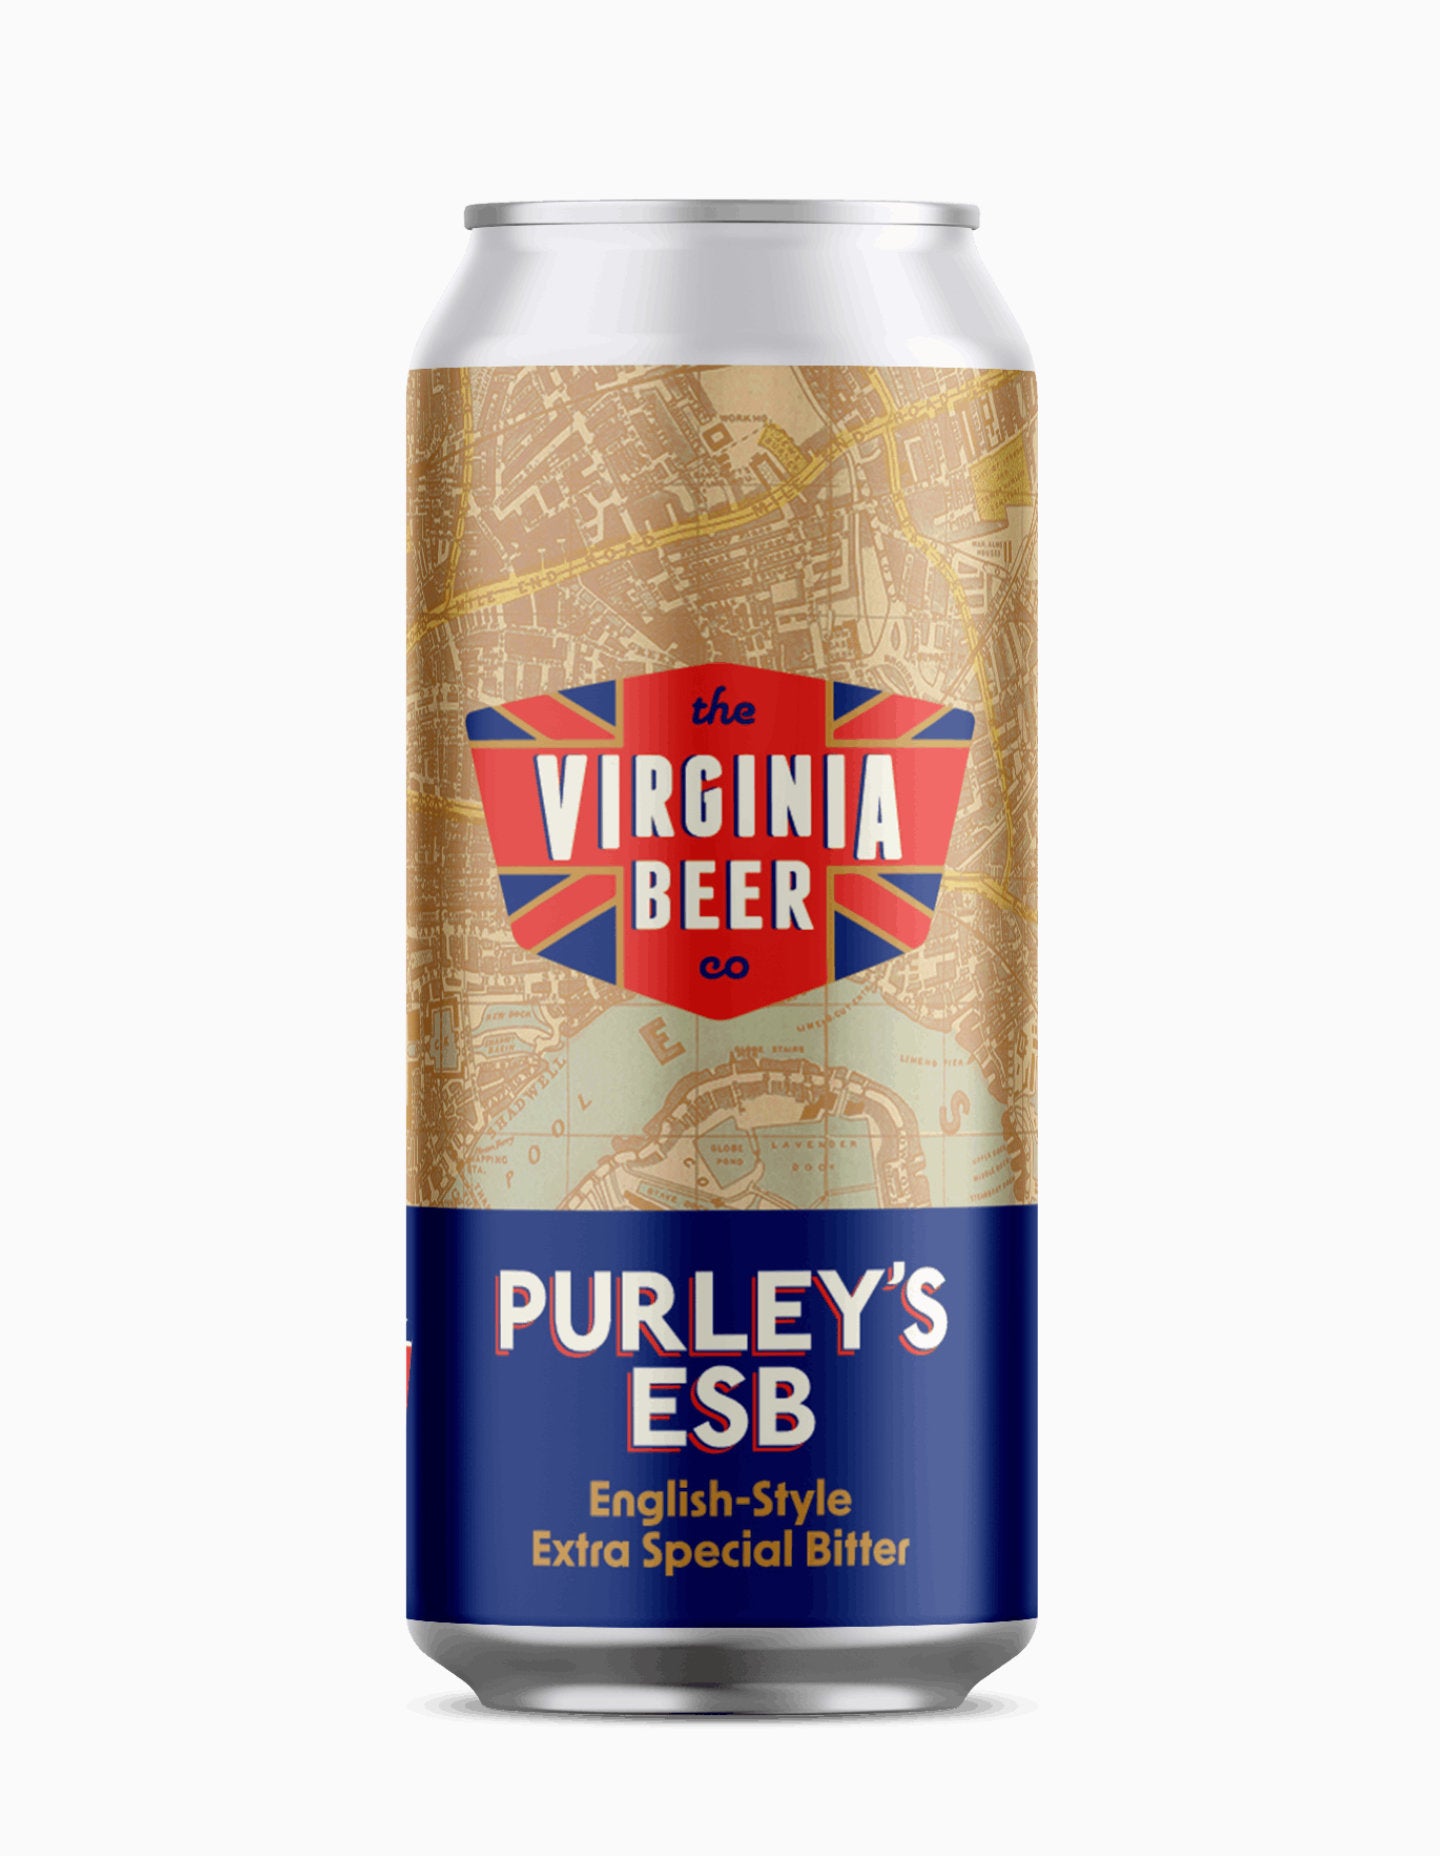 Purley's ESB